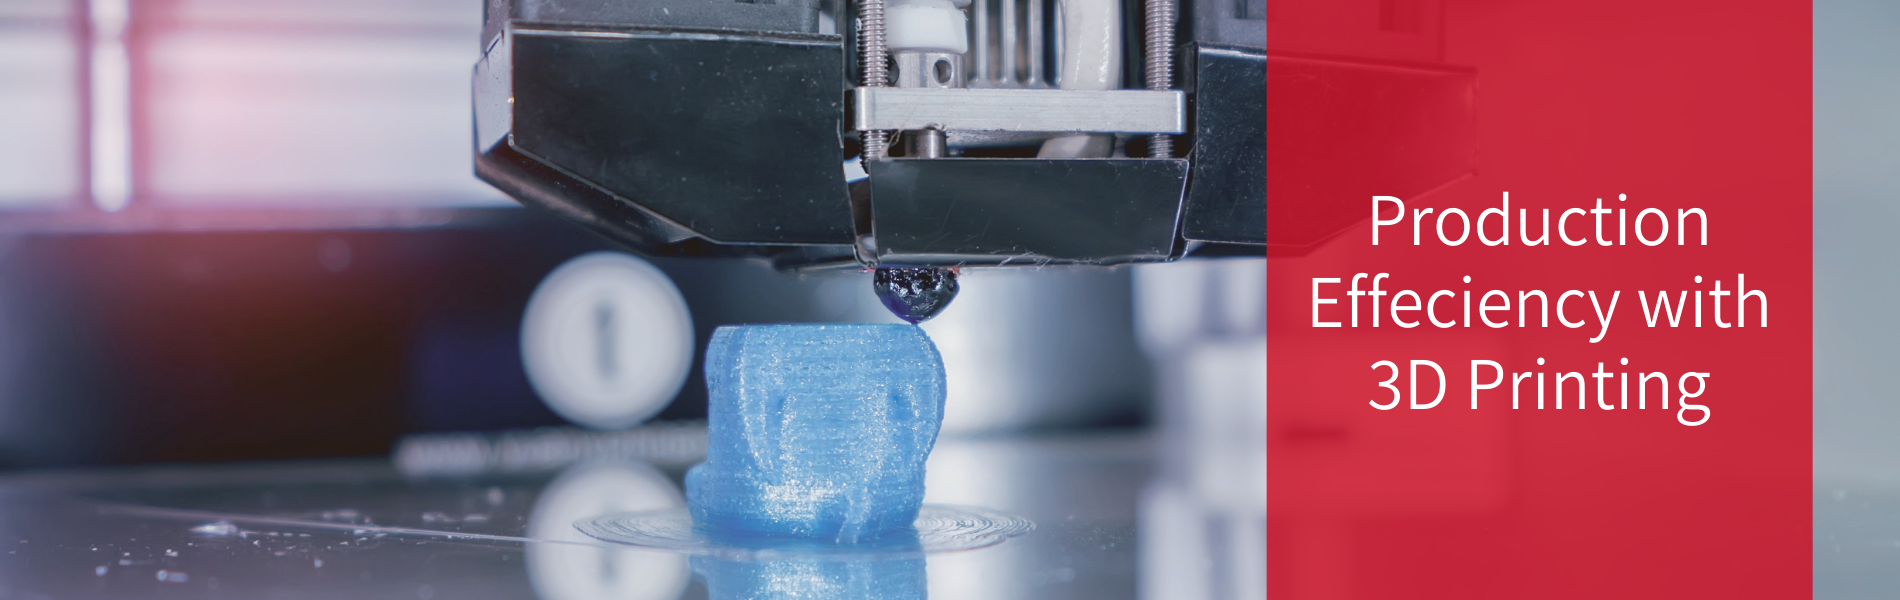 3D printing for production efficiency